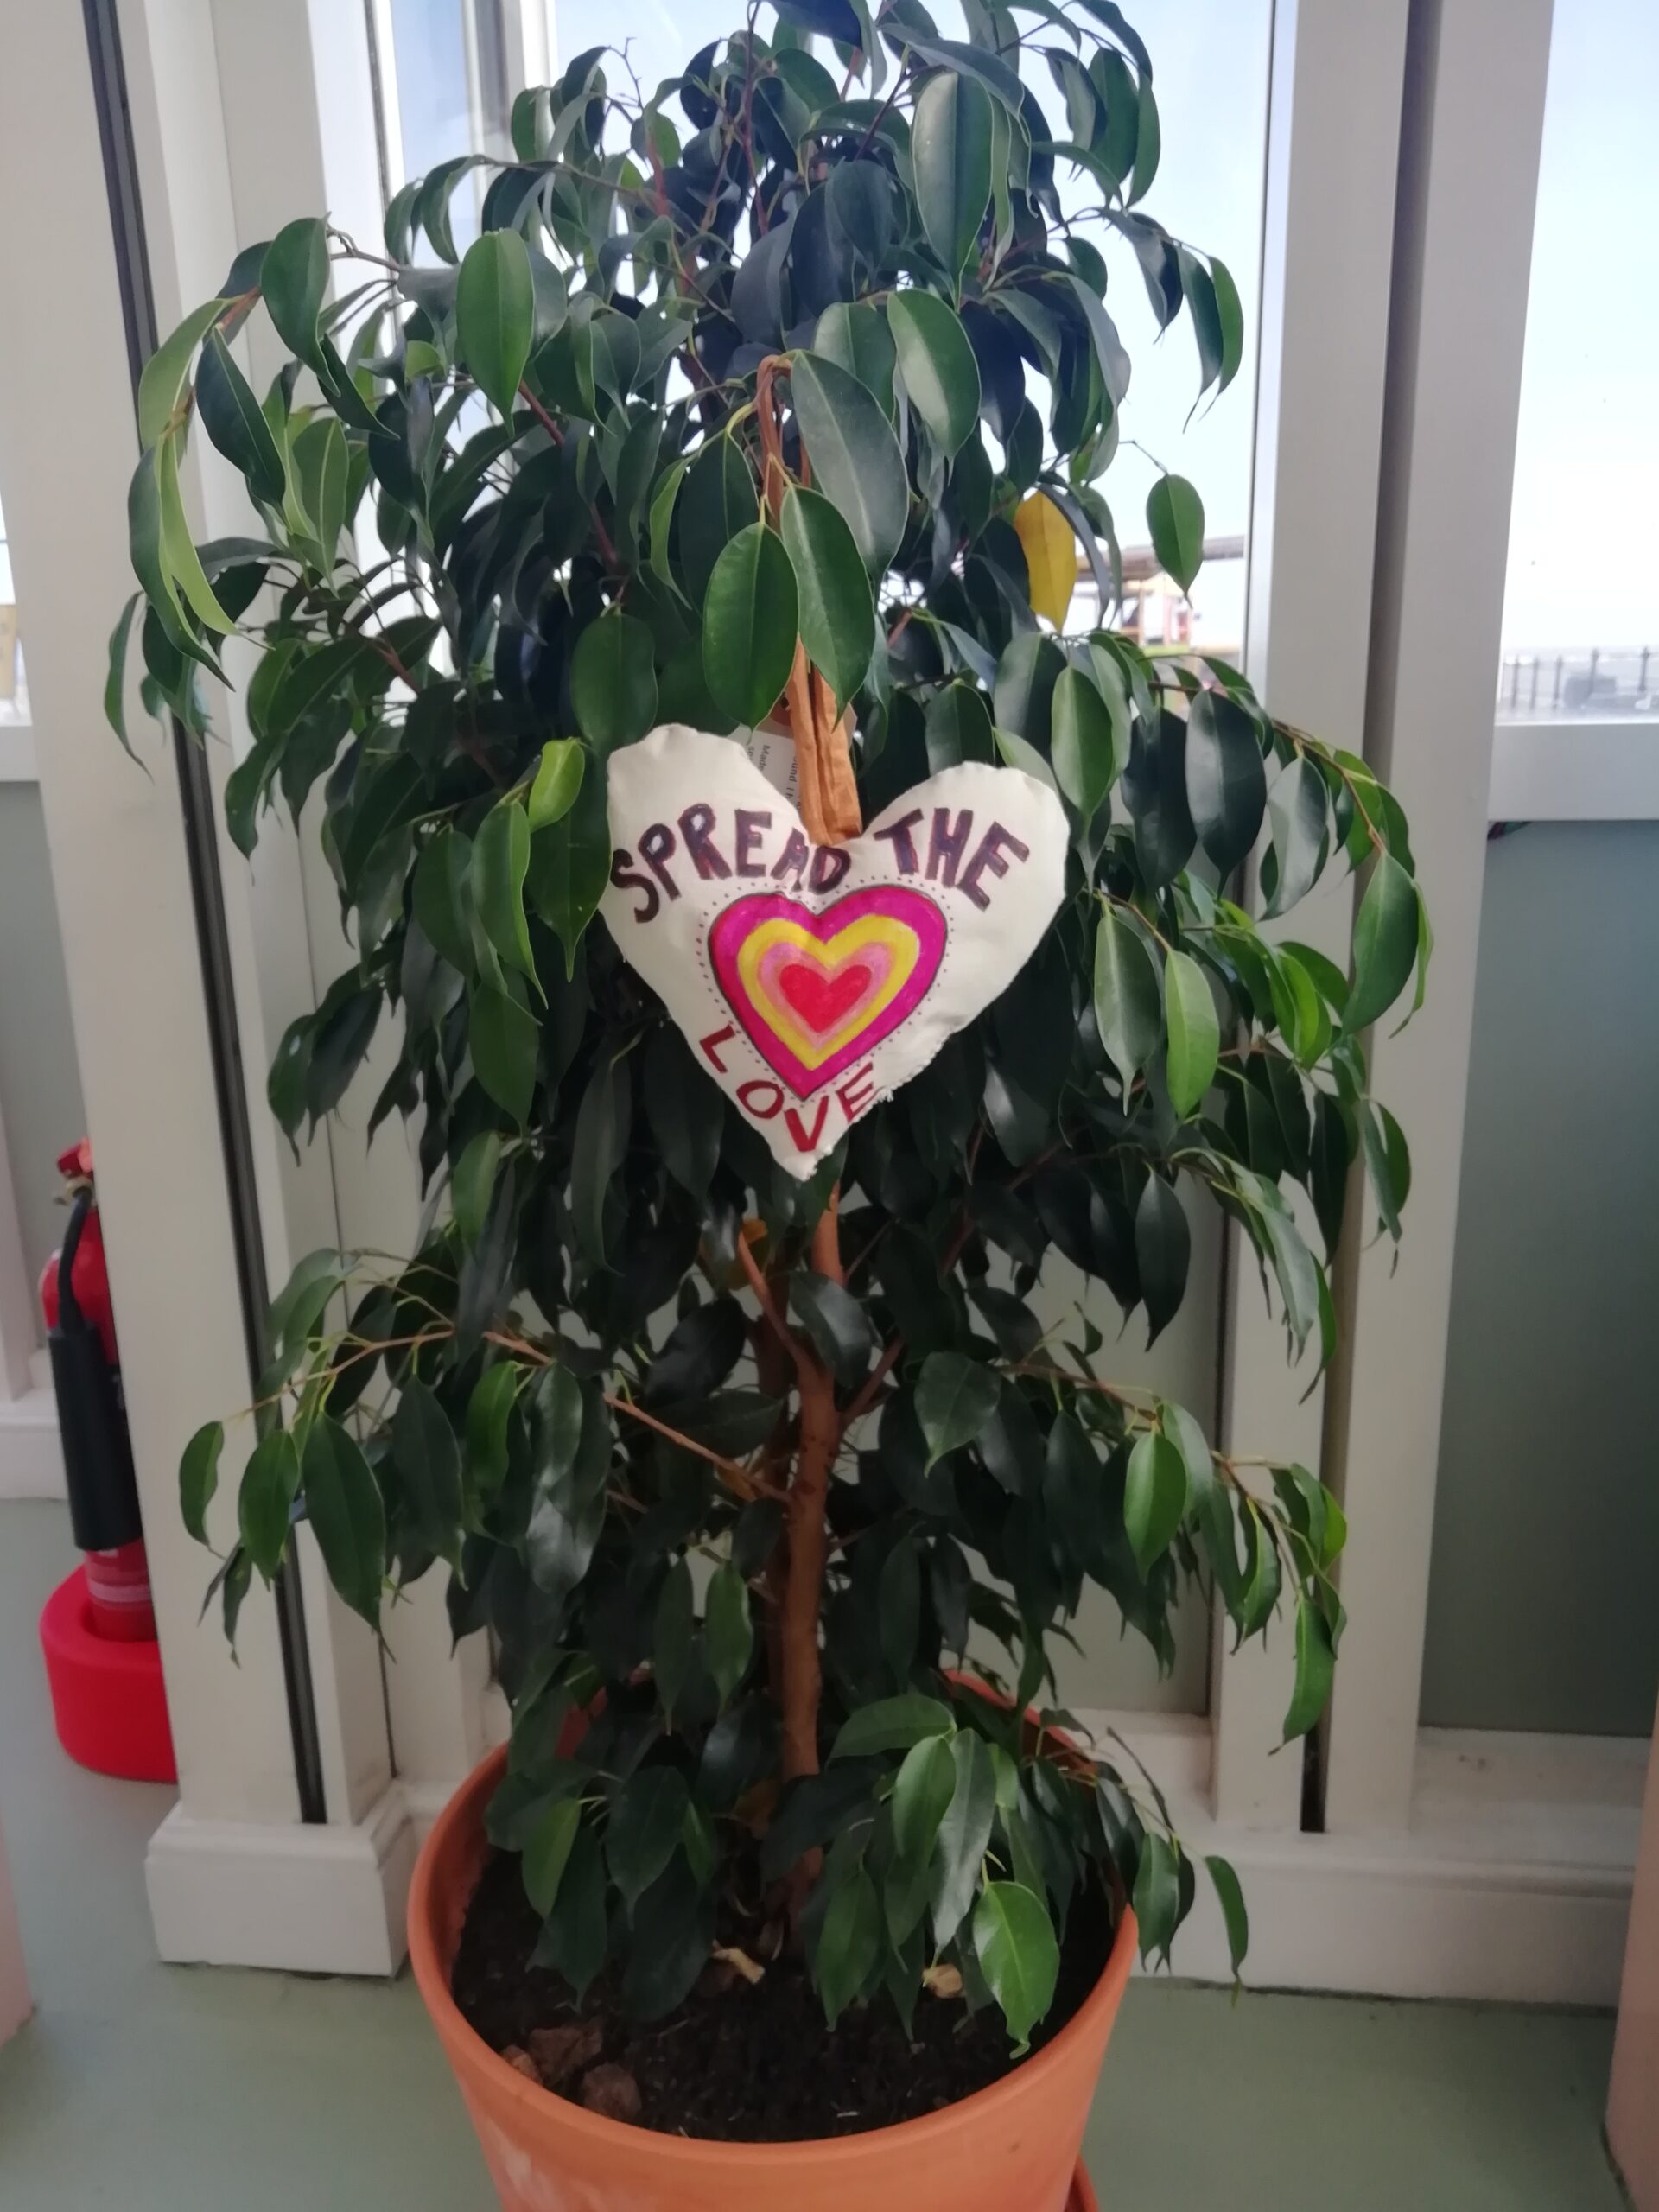 White heart hanging on an inside plant. Heart decorated with colourful concentric hearts and 'Spread the love'